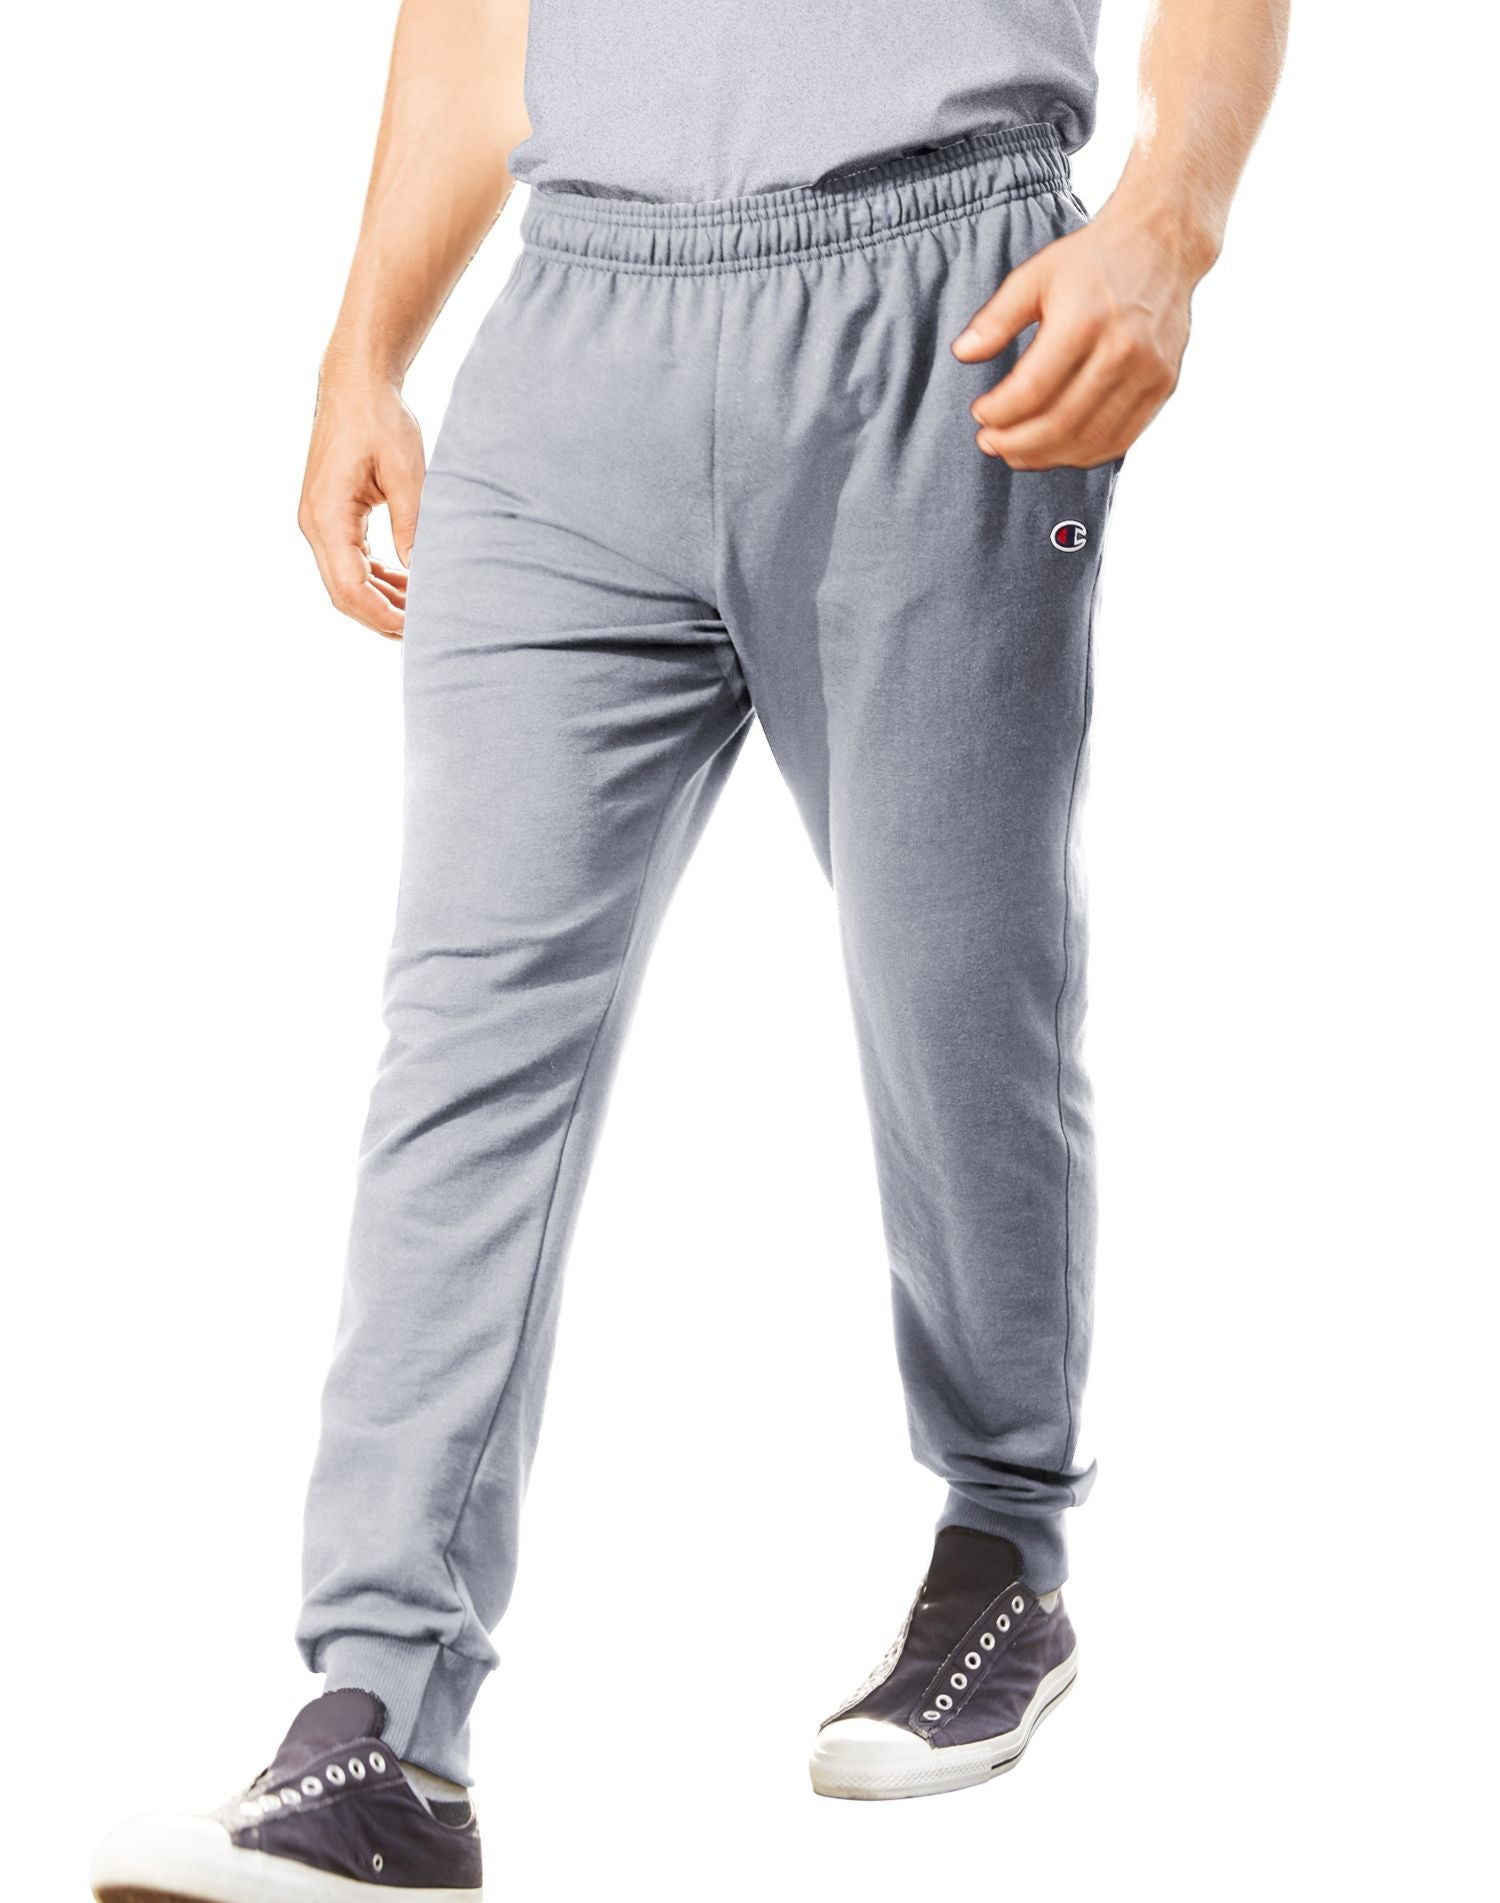 P0276 - Champion Mens French Terry Jogger Pants